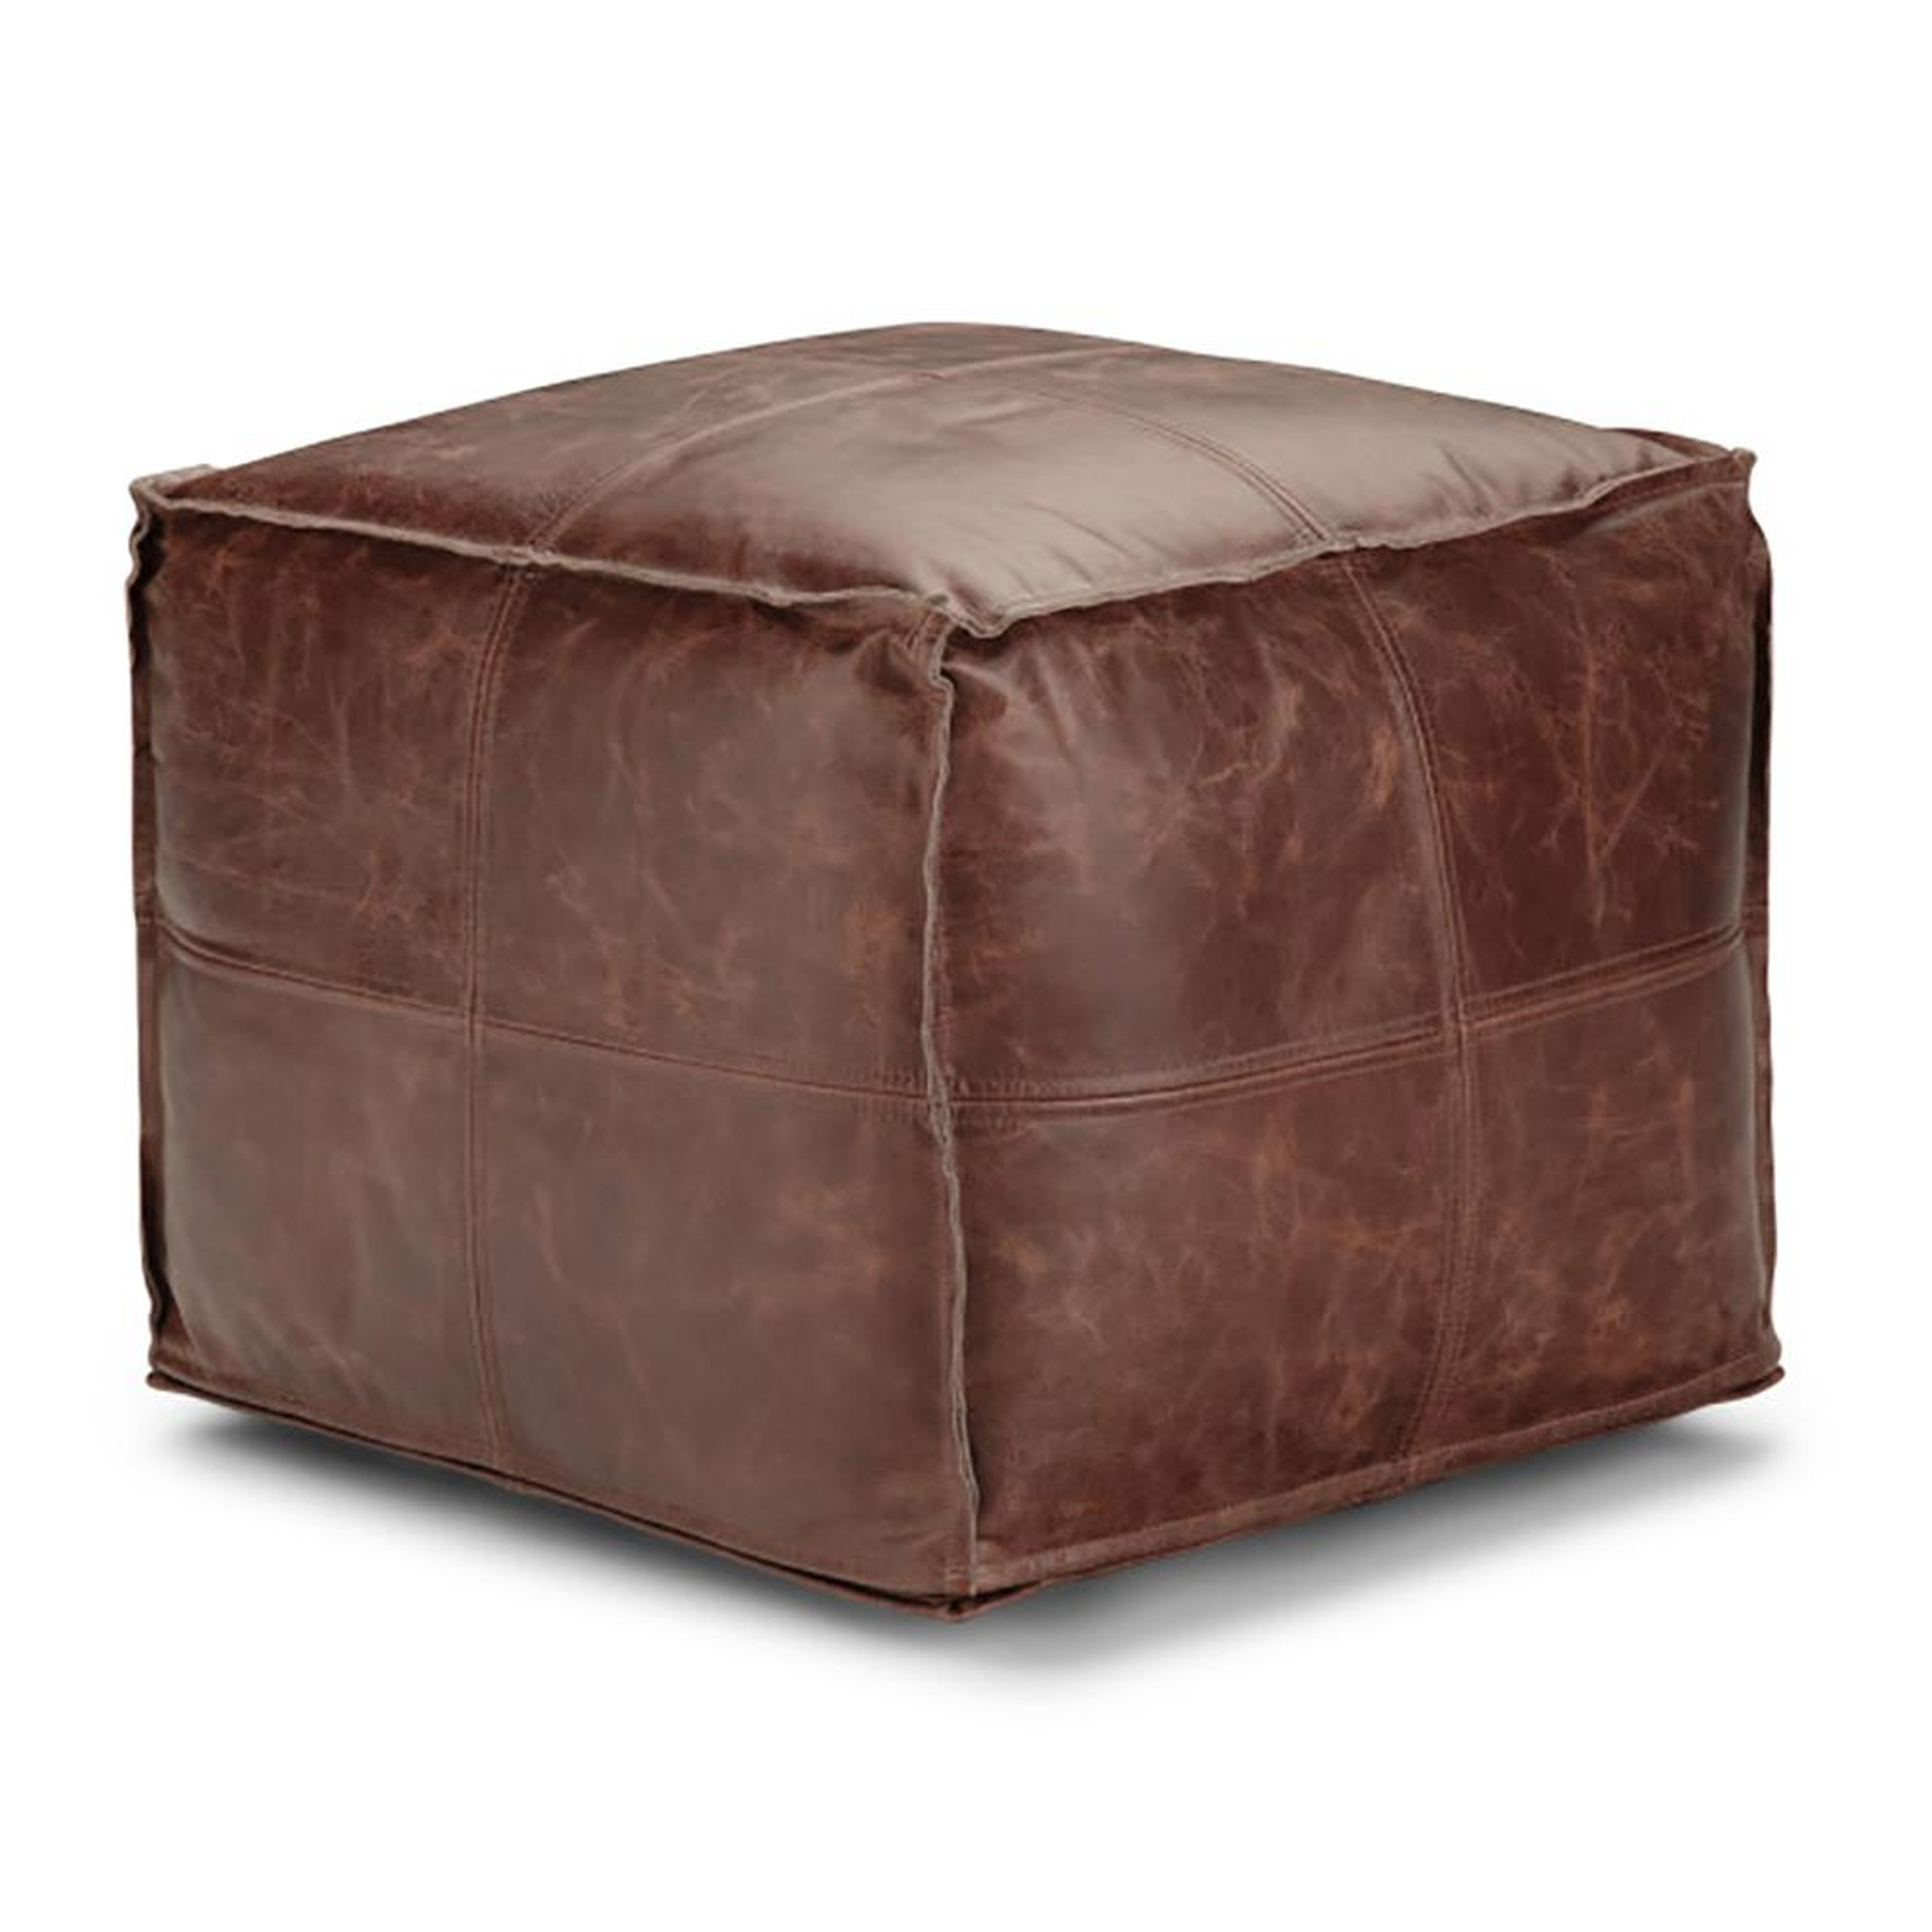 CCT GLOBAL SOURCING Dewitt Transitional Brown Leather Square Pouf - Home Depot